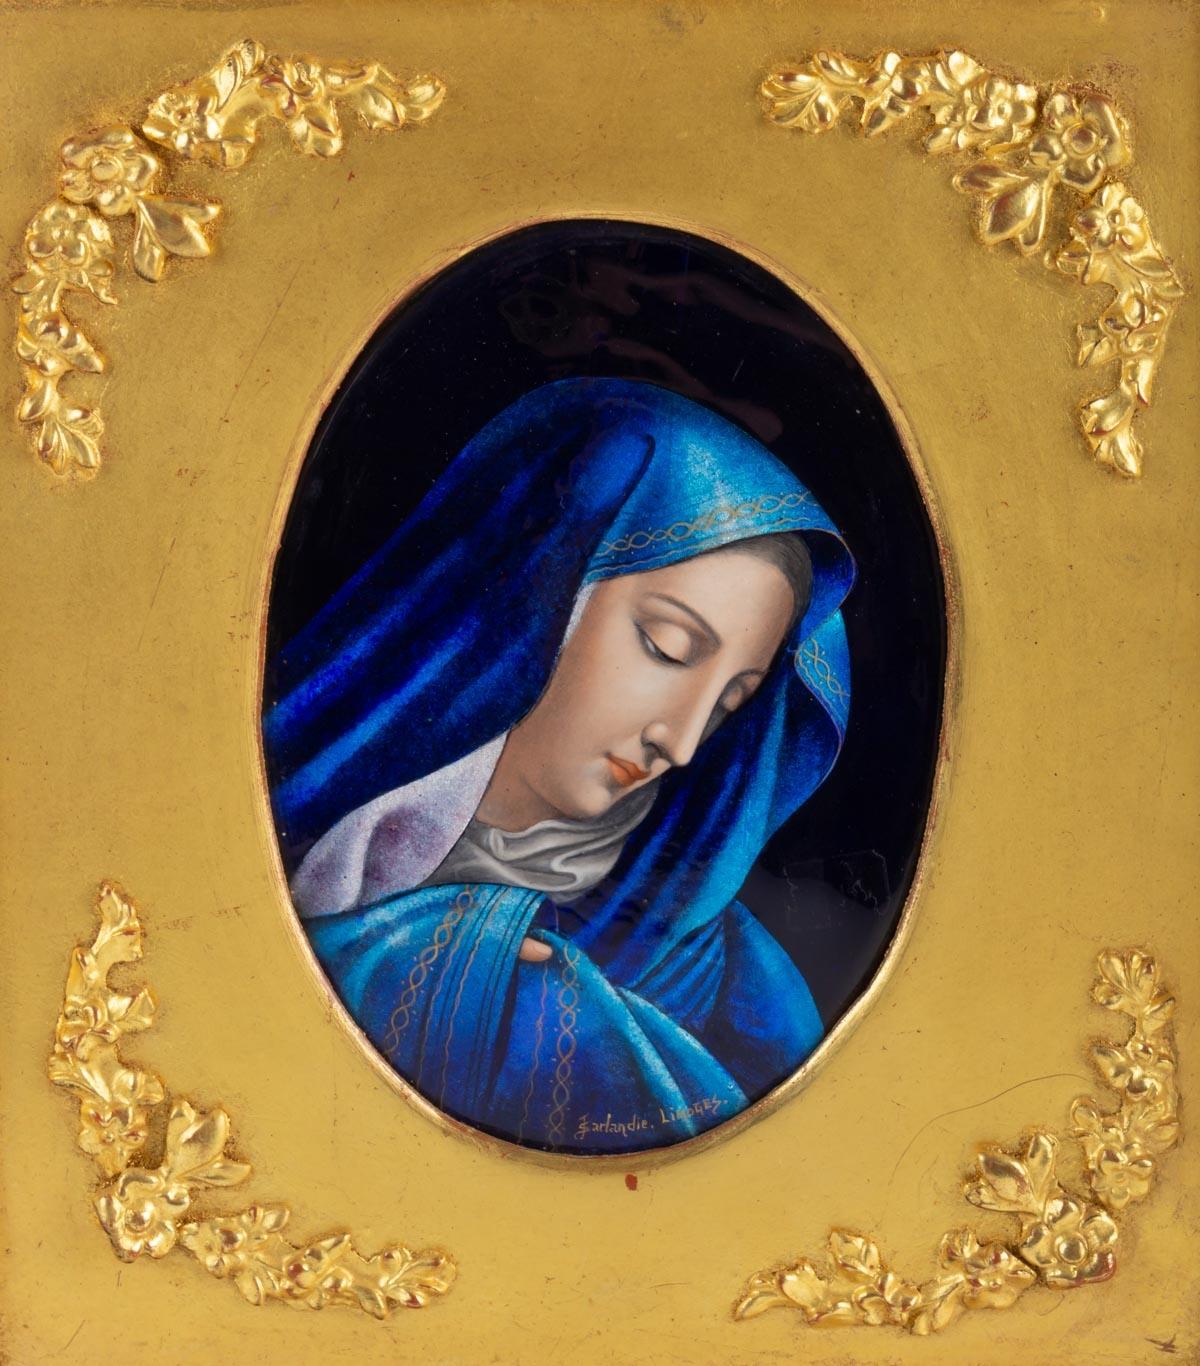 Oval shaped plate in Limoge enamel, representing the Virgin Mary dressed in a wrapping veil of blue, white and turquoise colors. In a carved frame gilded with gold leaf.

Signed lower Sarlandie. Limoges.

Measures: Height 31 cm / width 29 cm.